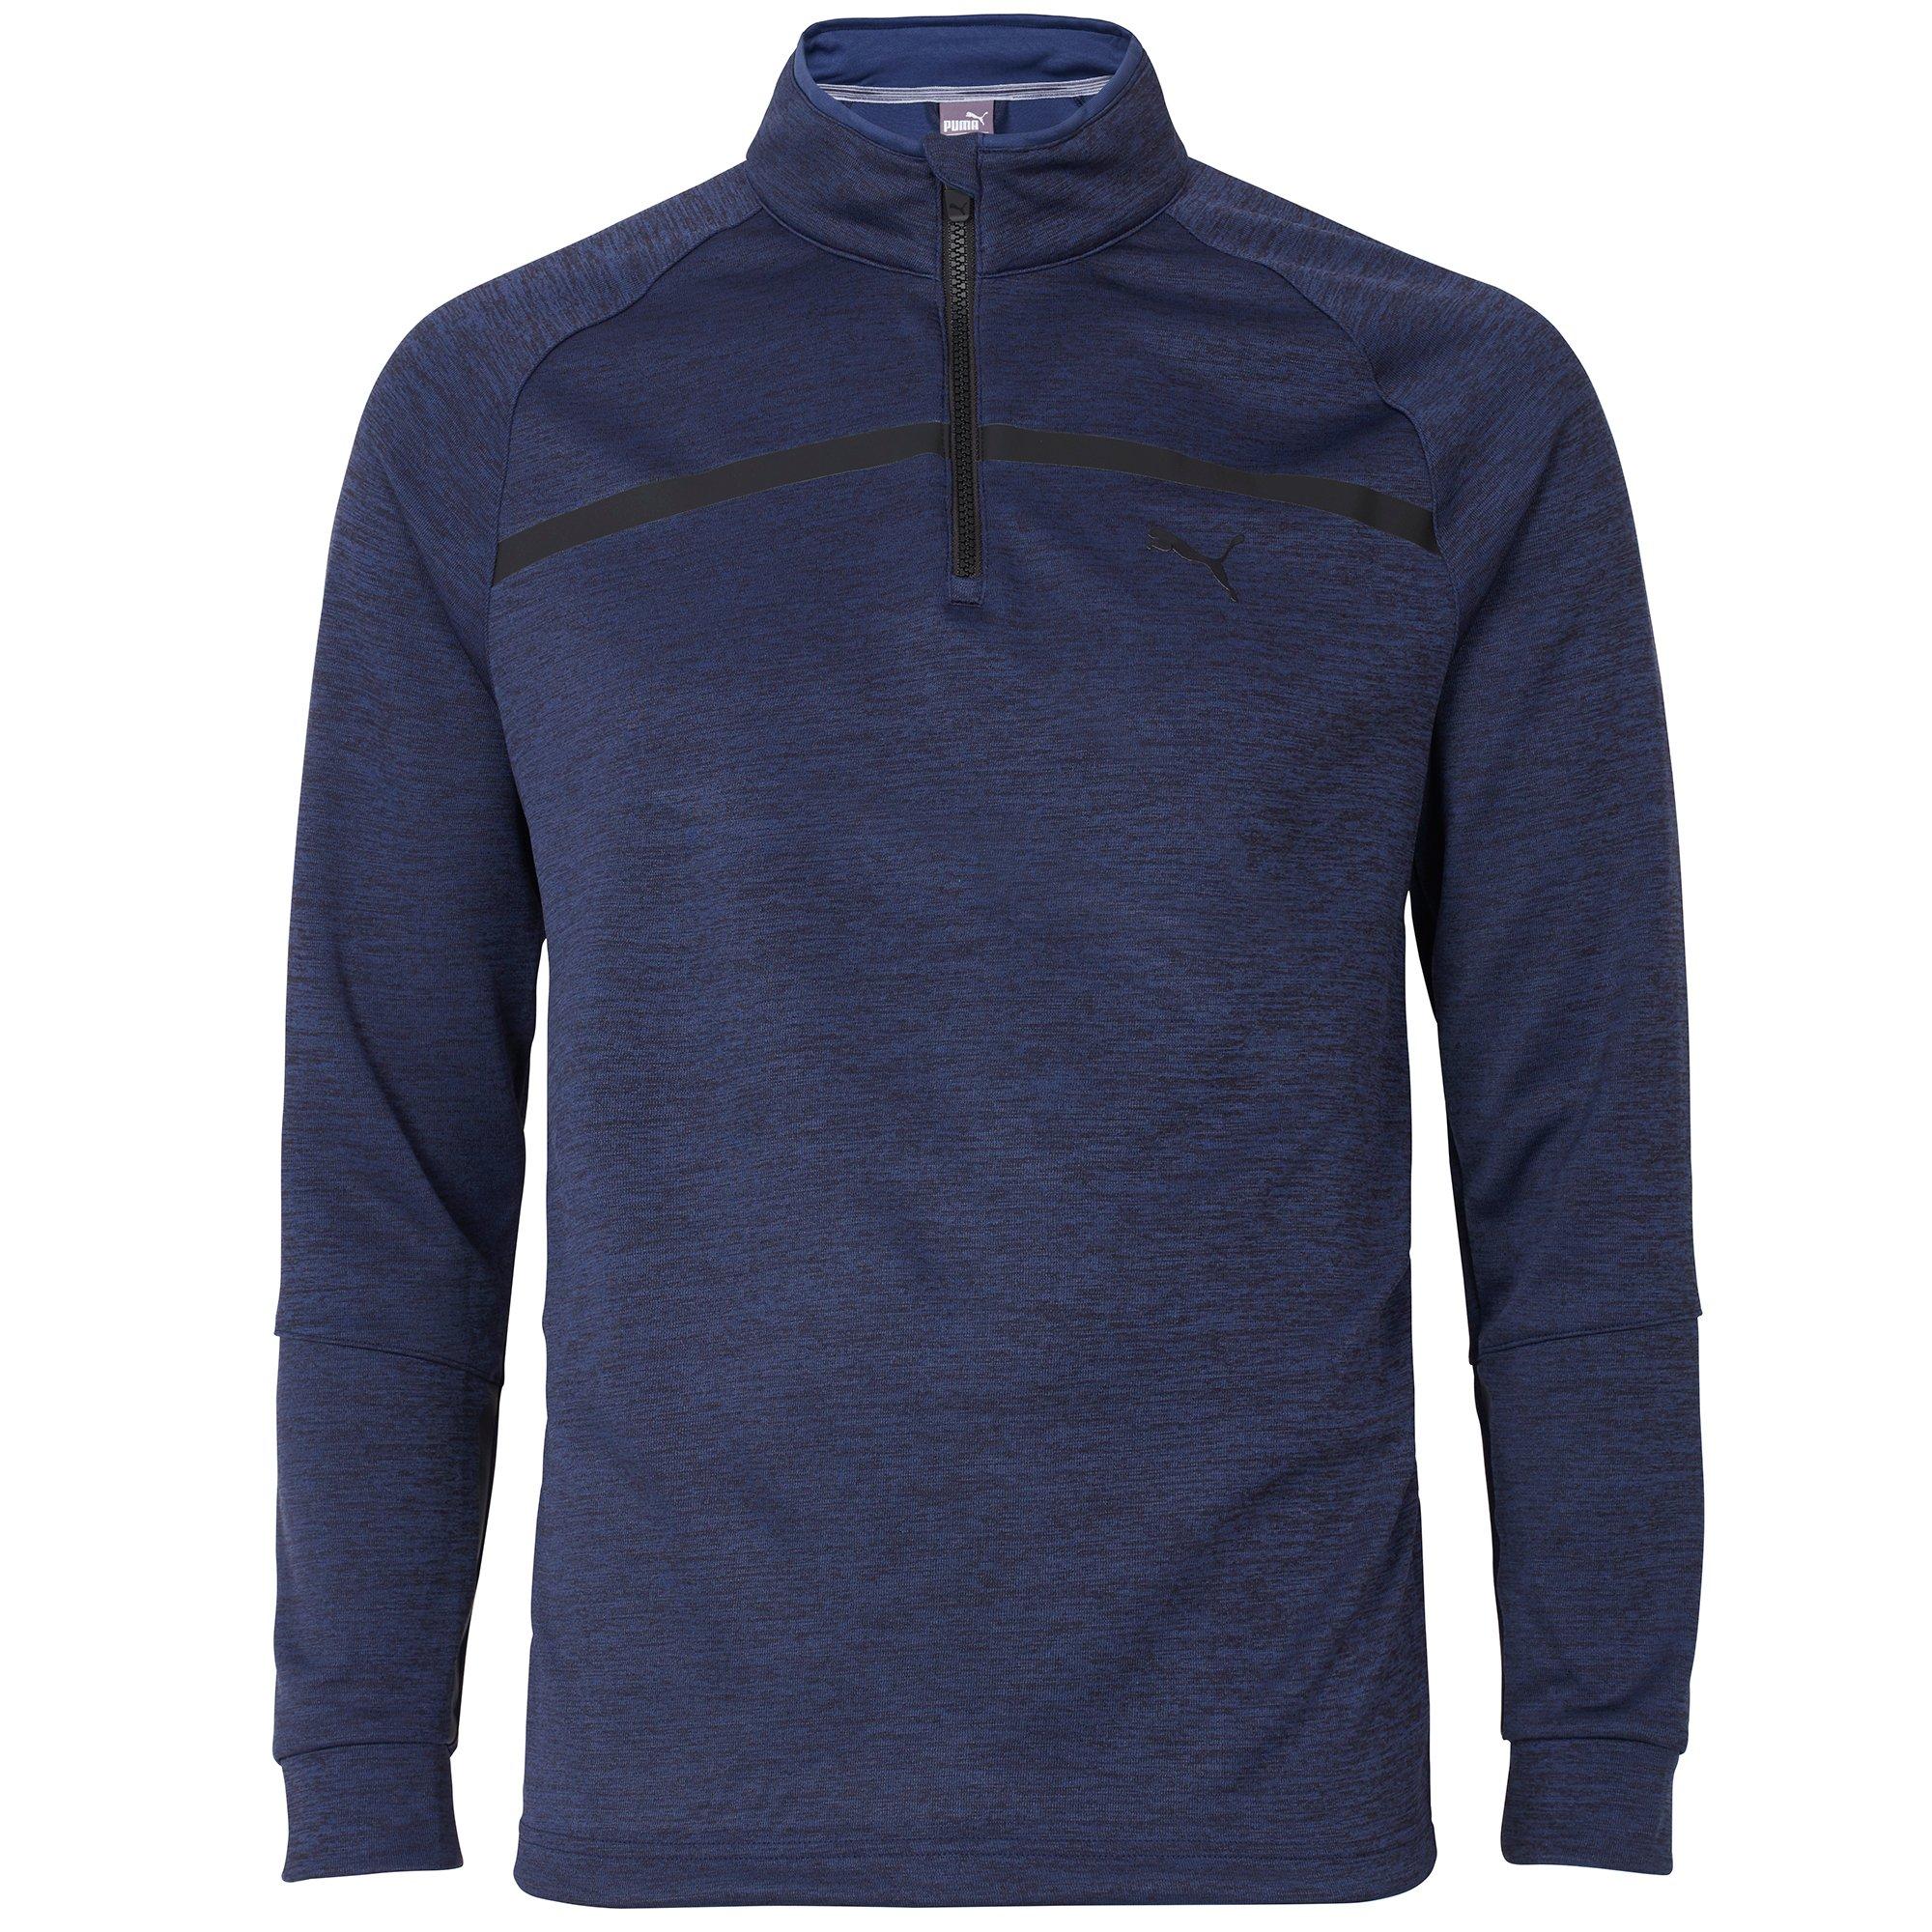 Arsenal Puma Golf Bonded 1/4 Zip Popover Blue Marl | Official Online Store